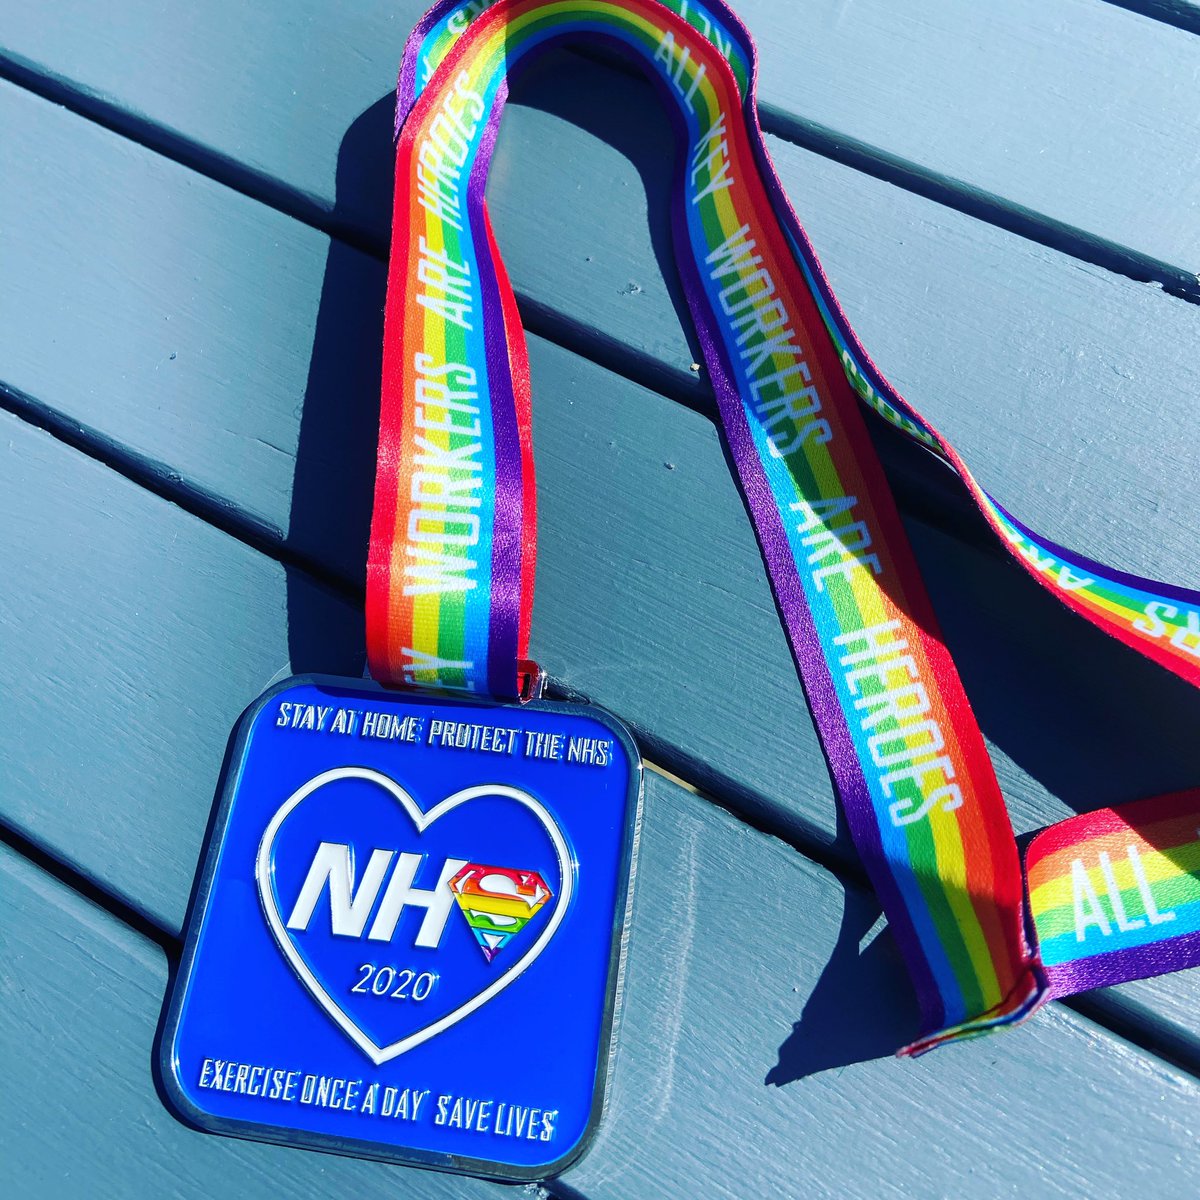 This beautiful medal arrived today for my virtual run for the NHS. #racethedistance #ProtectTheNHS #StayAtHomeSaveLives